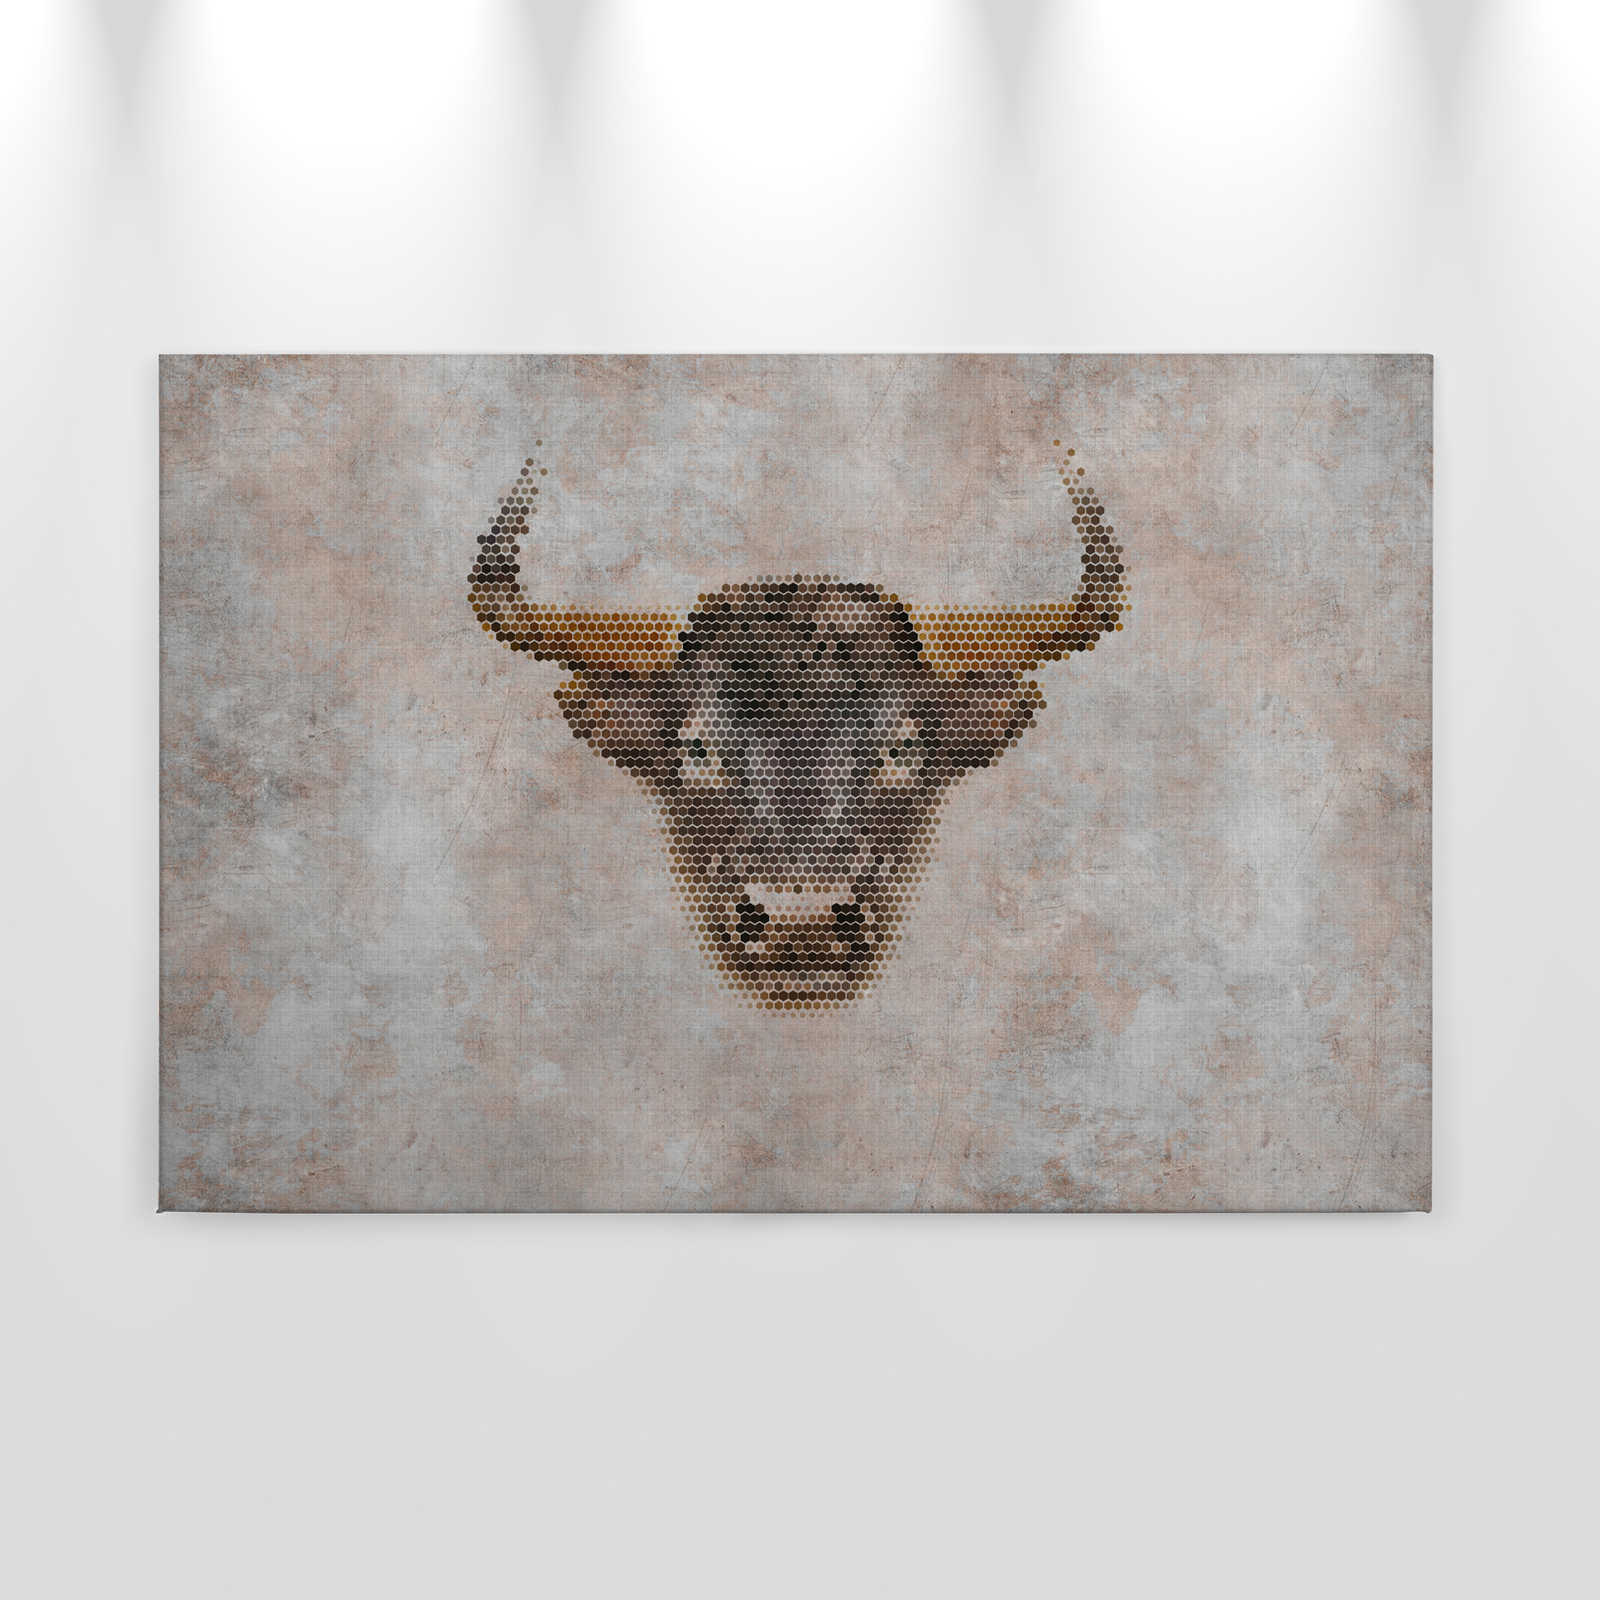             Big three 2 - Canvas painting, natural linen structure in concrete look with buffalo - 0.90 m x 0.60 m
        